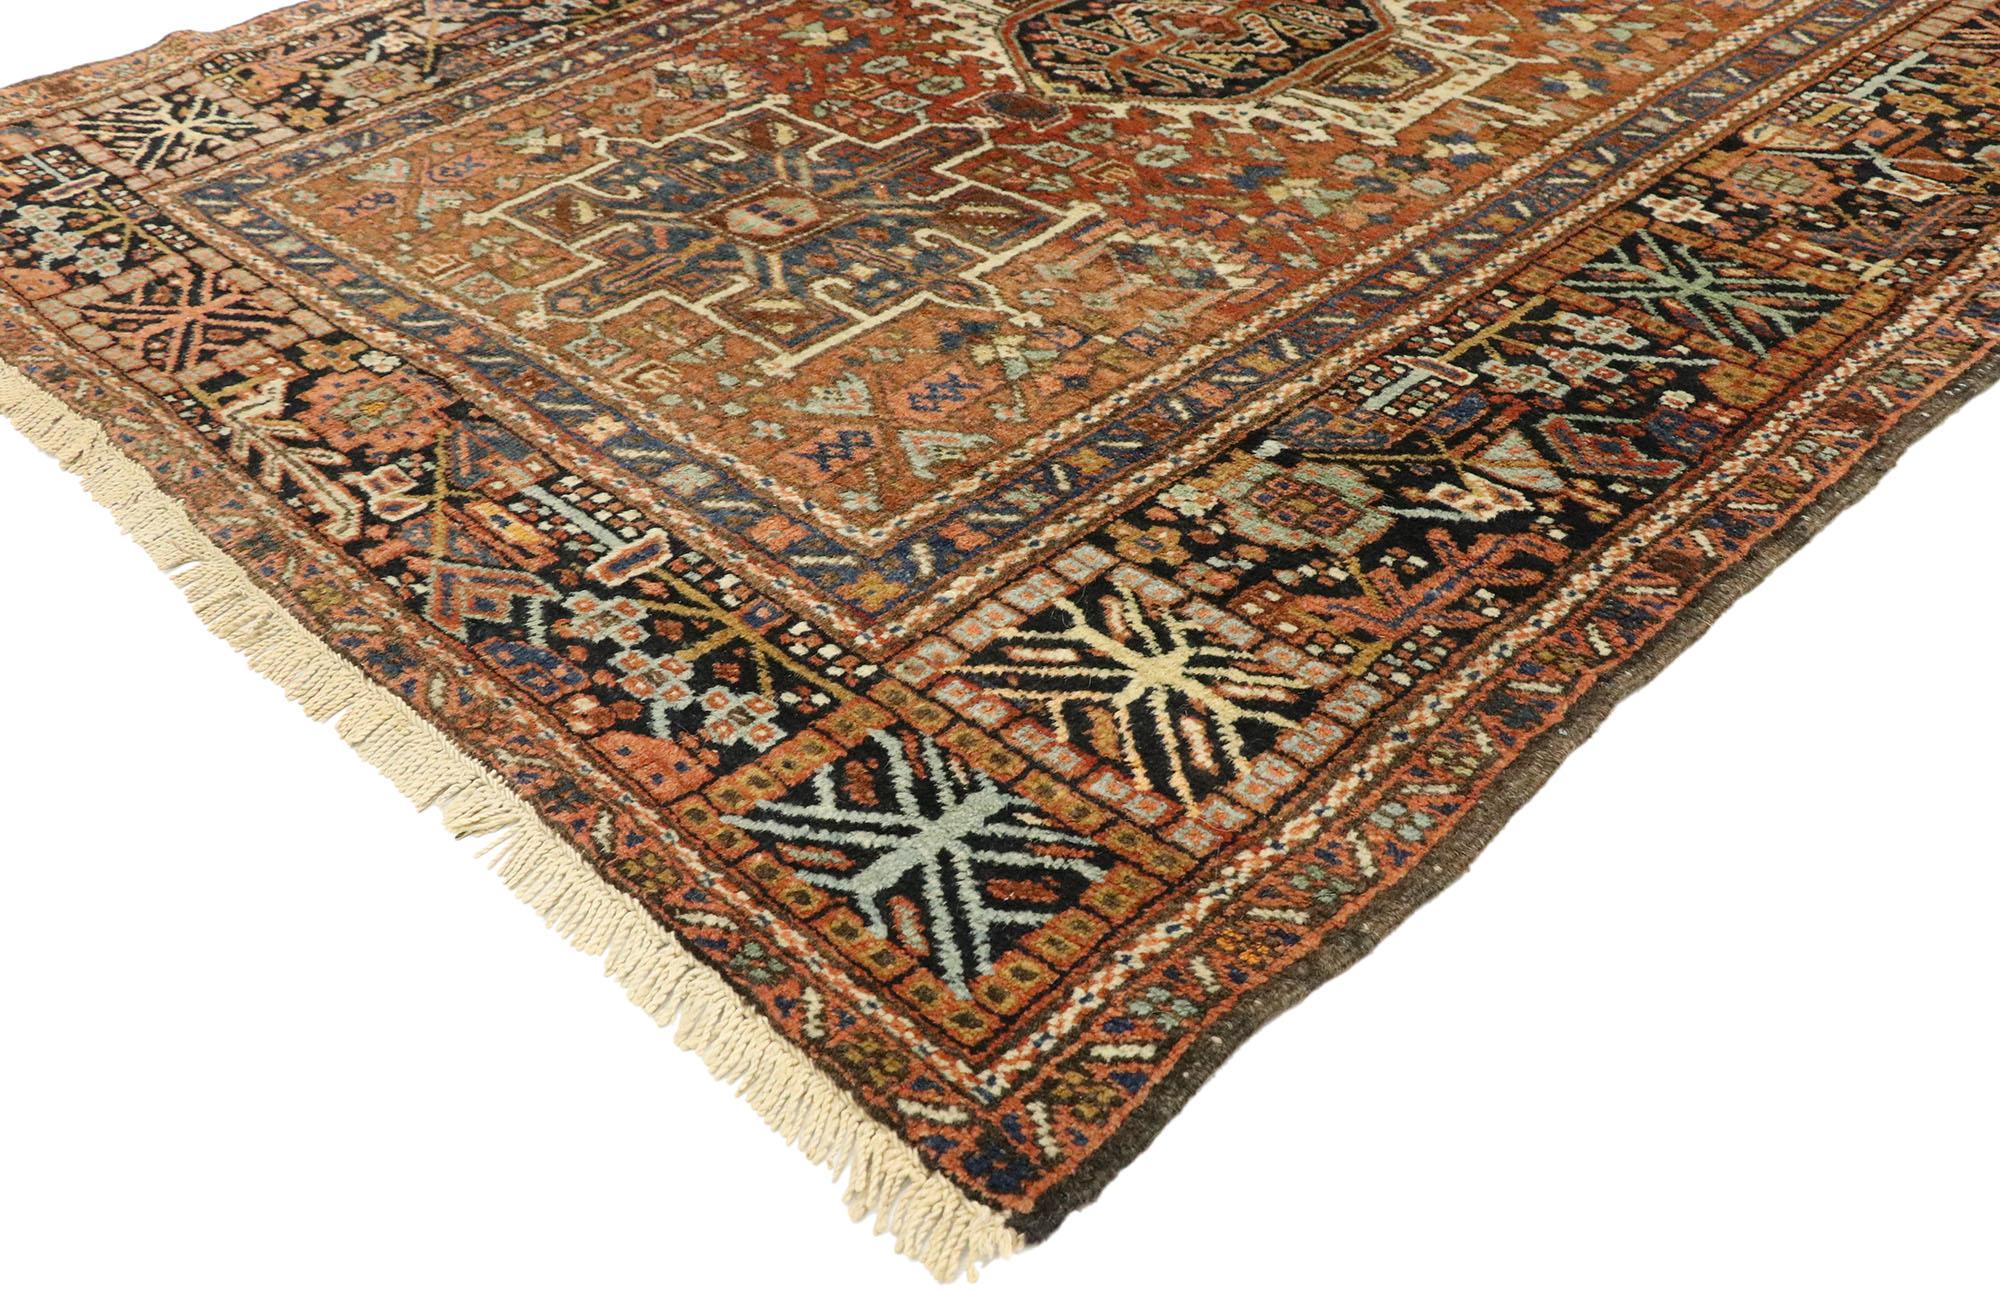 77067 antique Persian Karaja Heriz rug with Tribal style, Study or Home Office rug. This hand knotted wool antique Persian Karaja Heriz rug features three medallions with cruciform motifs. The central scarab shaped medallion is flanked by two square